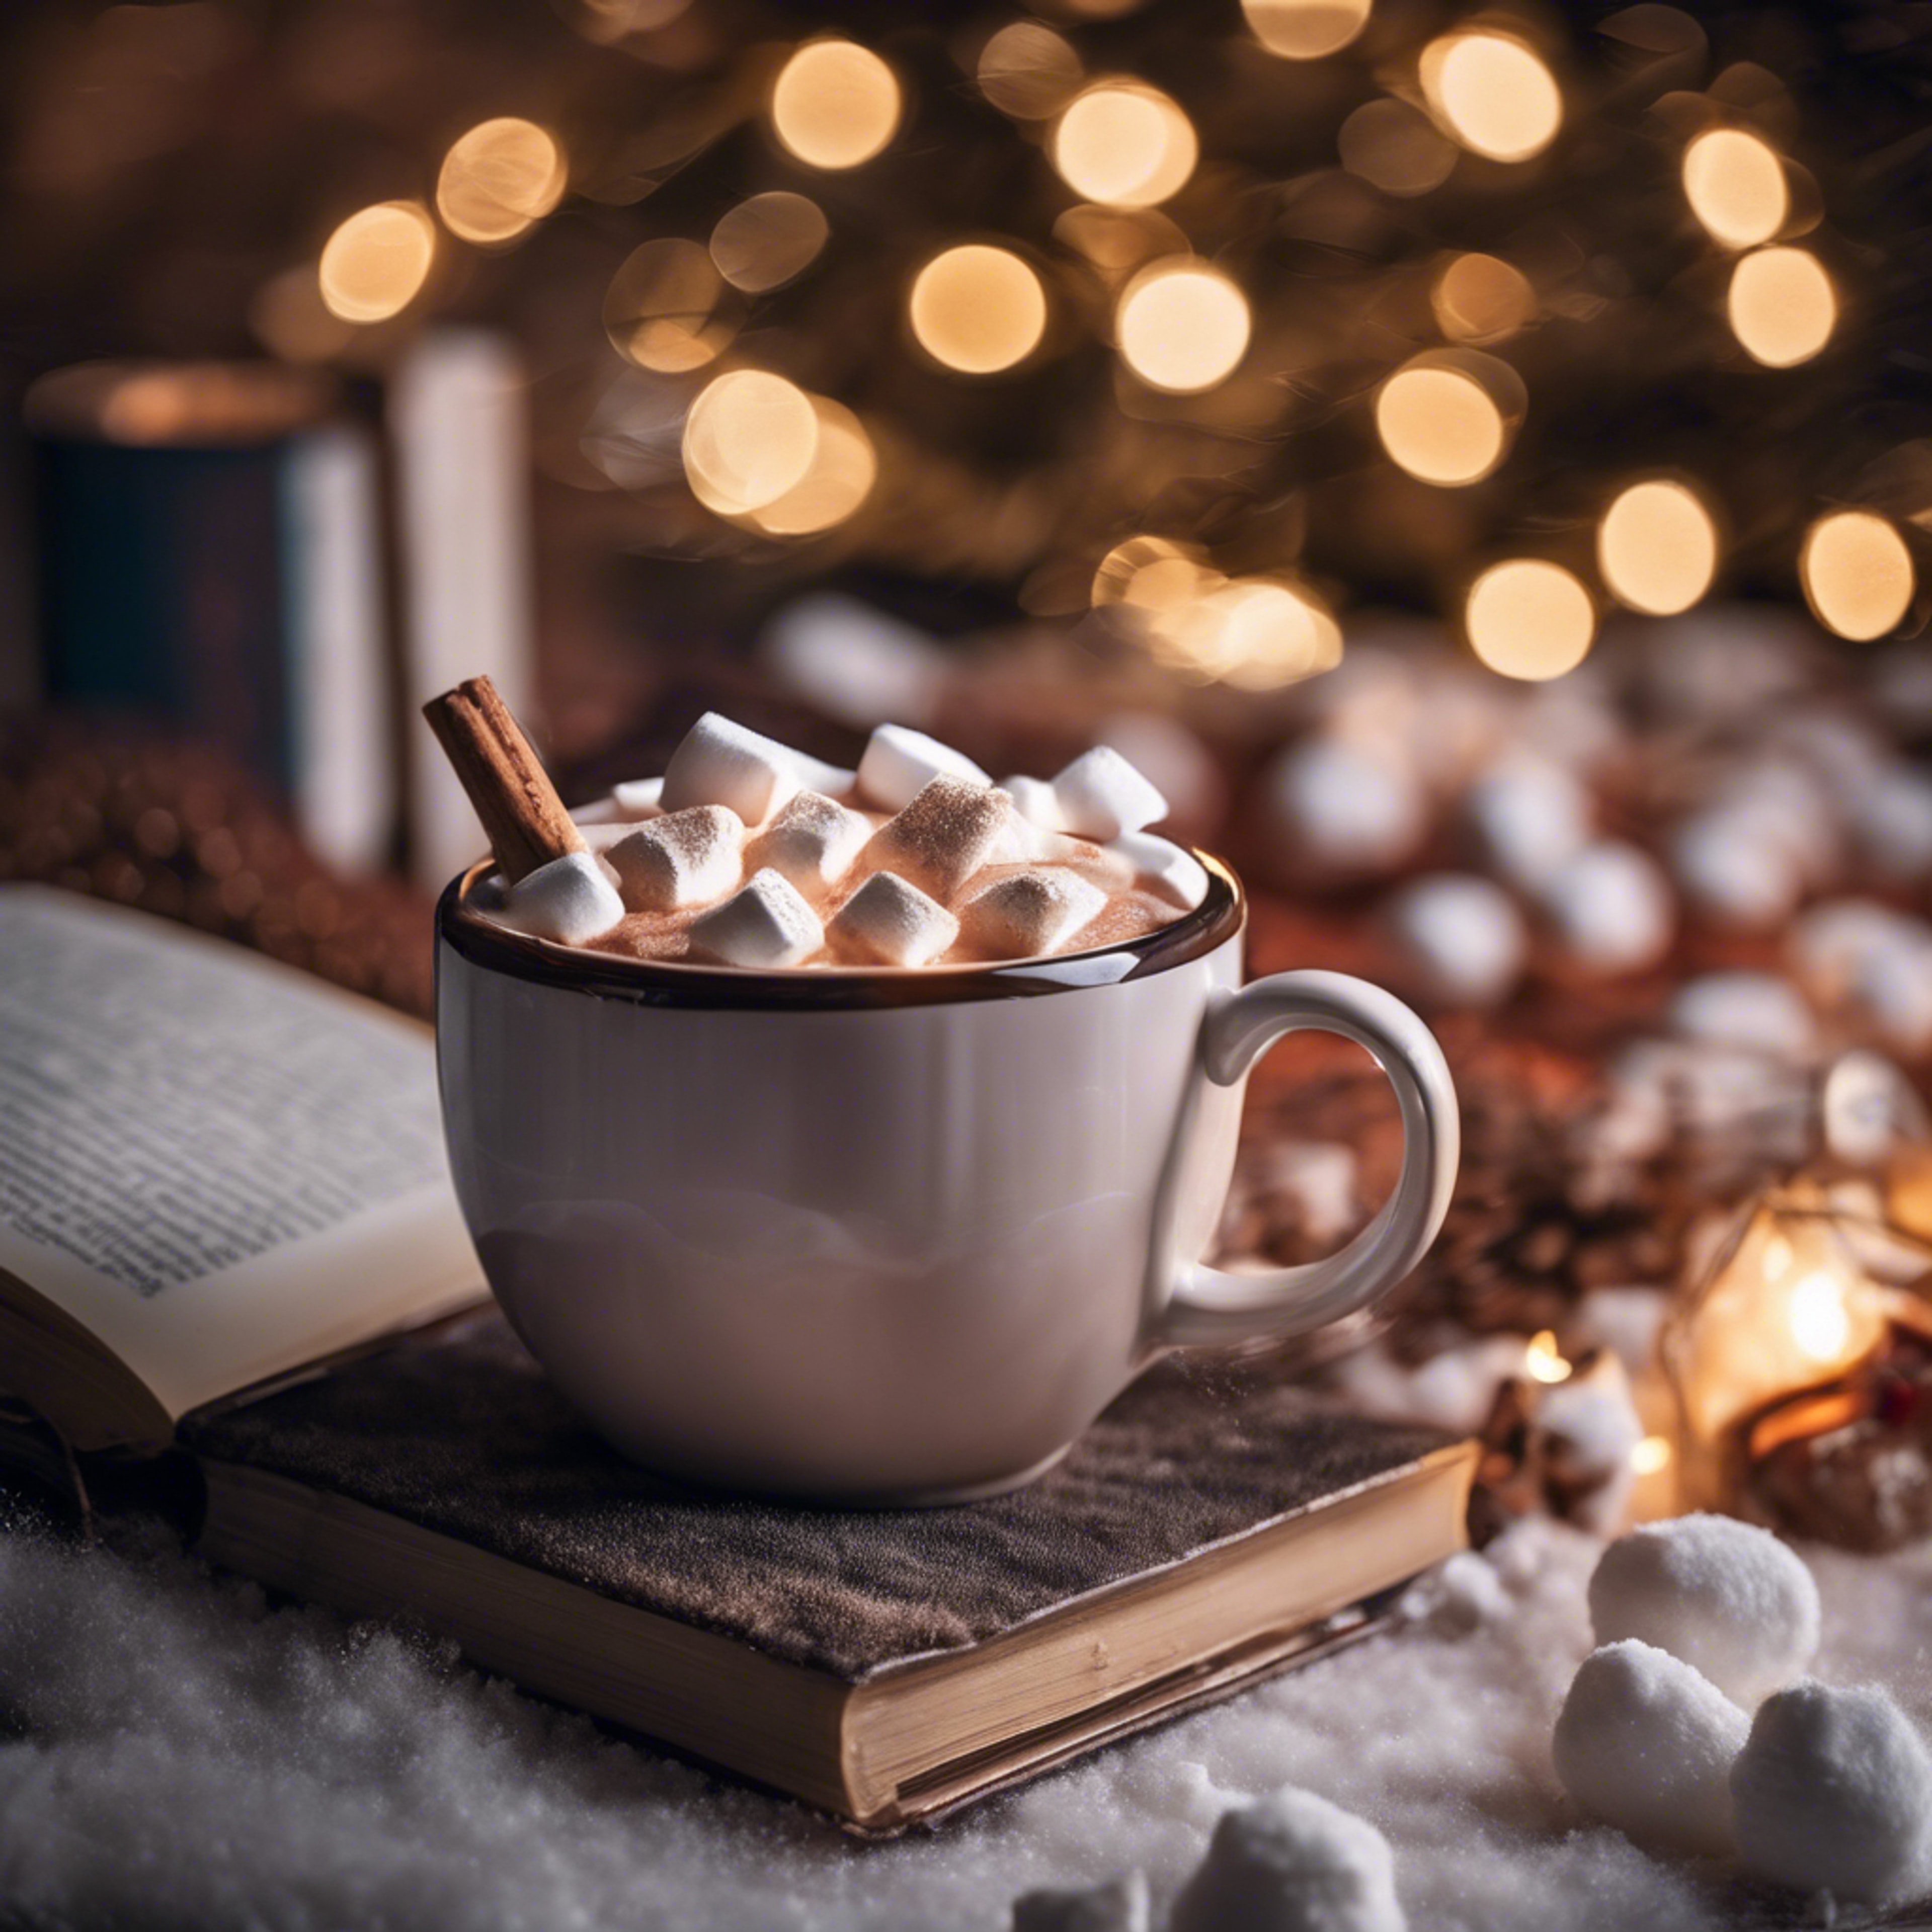 A steaming mug of hot cocoa topped with marshmallows, paired with a good book on a winter night. Hintergrund[bb1918feb58c4b029e23]